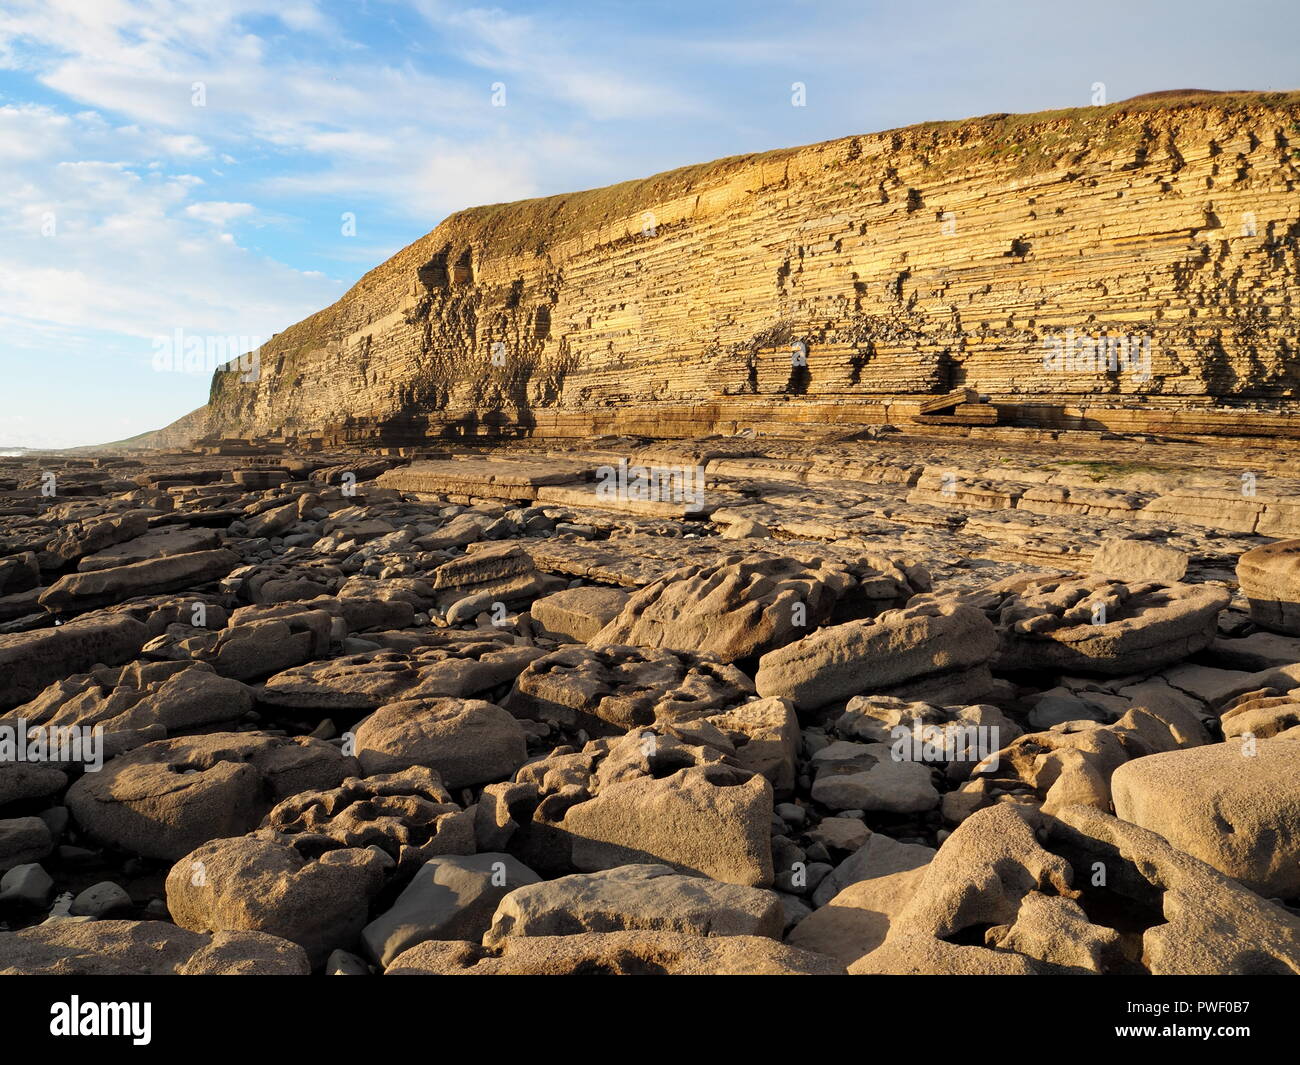 Carboniferous layers of limestone and shale cliffs at Dunraven Bay, Vale of Glamorgan, South Wales Stock Photo